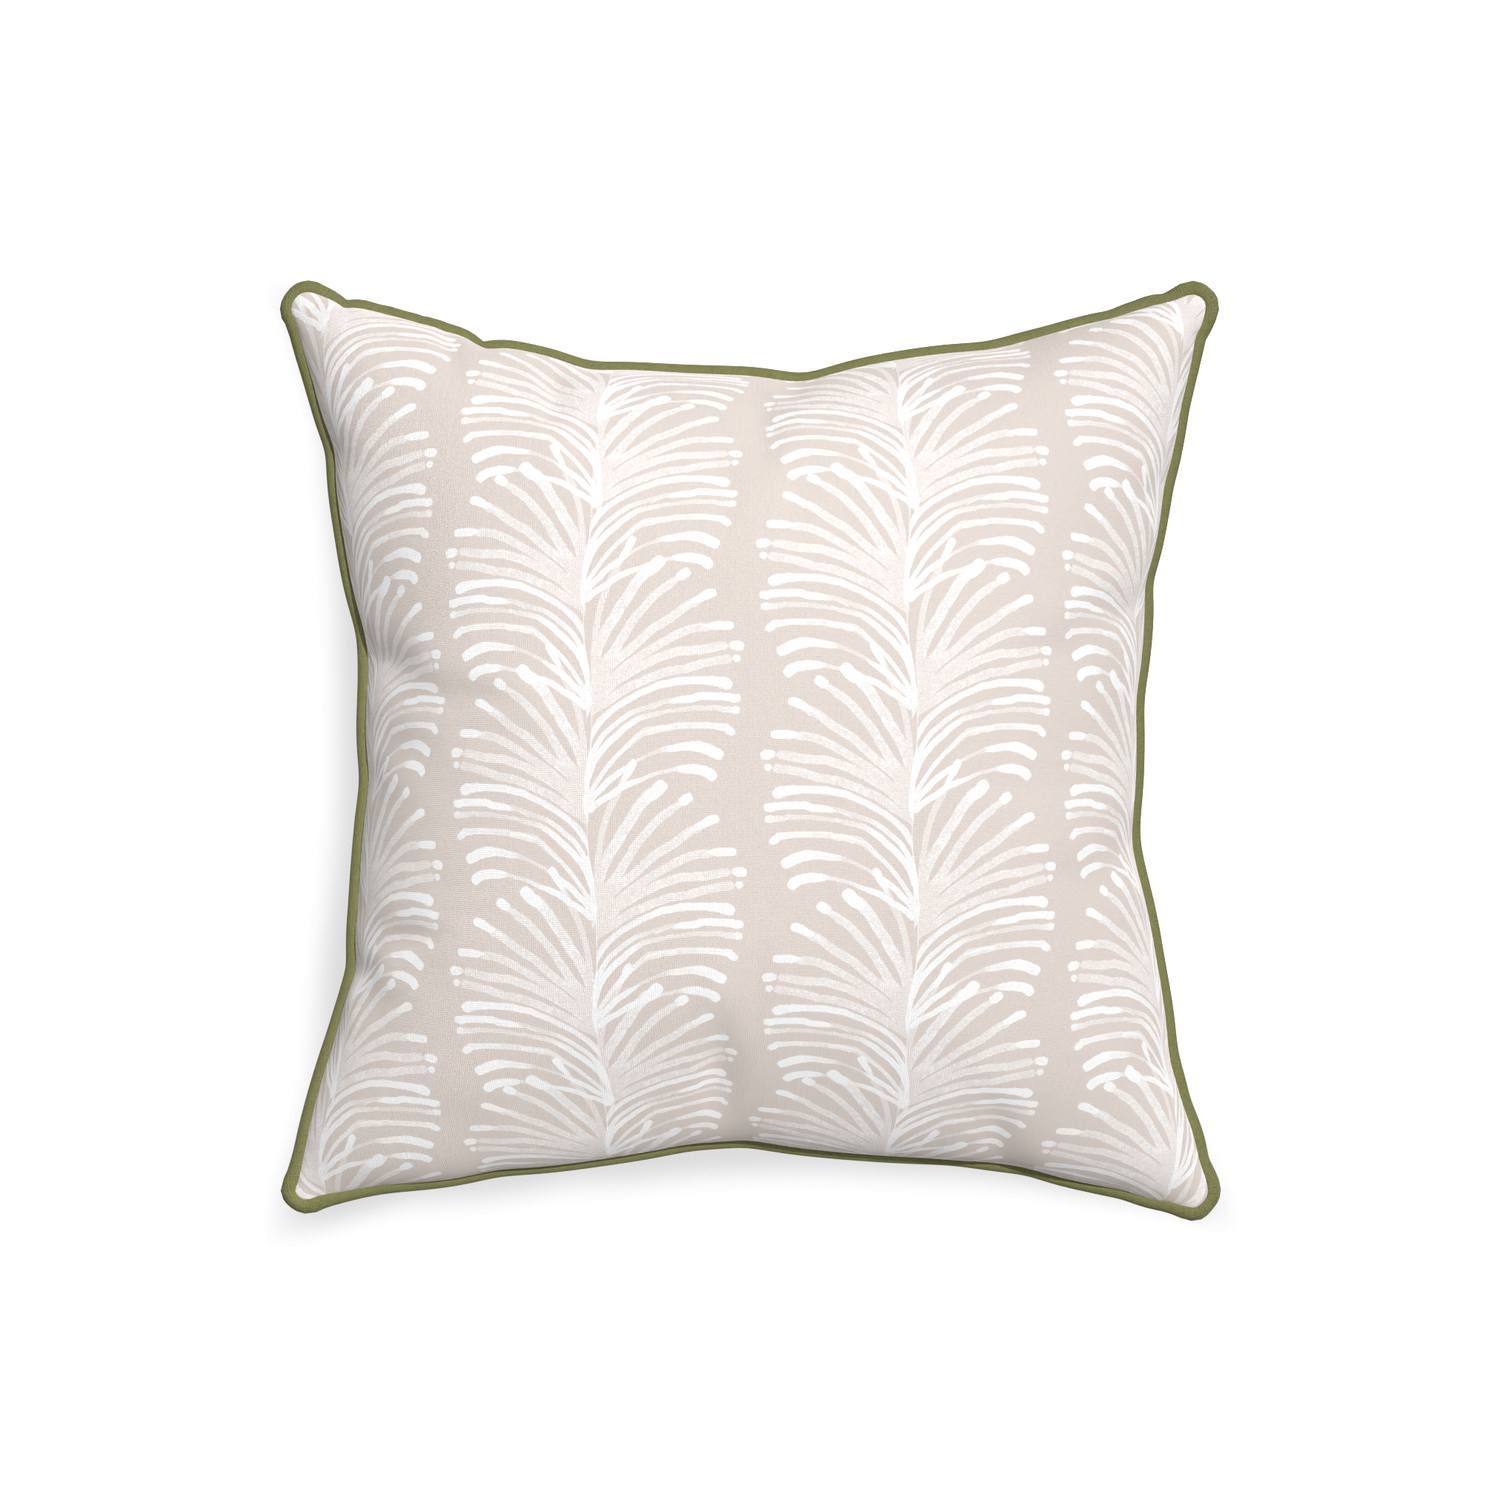 20-square emma sand custom pillow with moss piping on white background